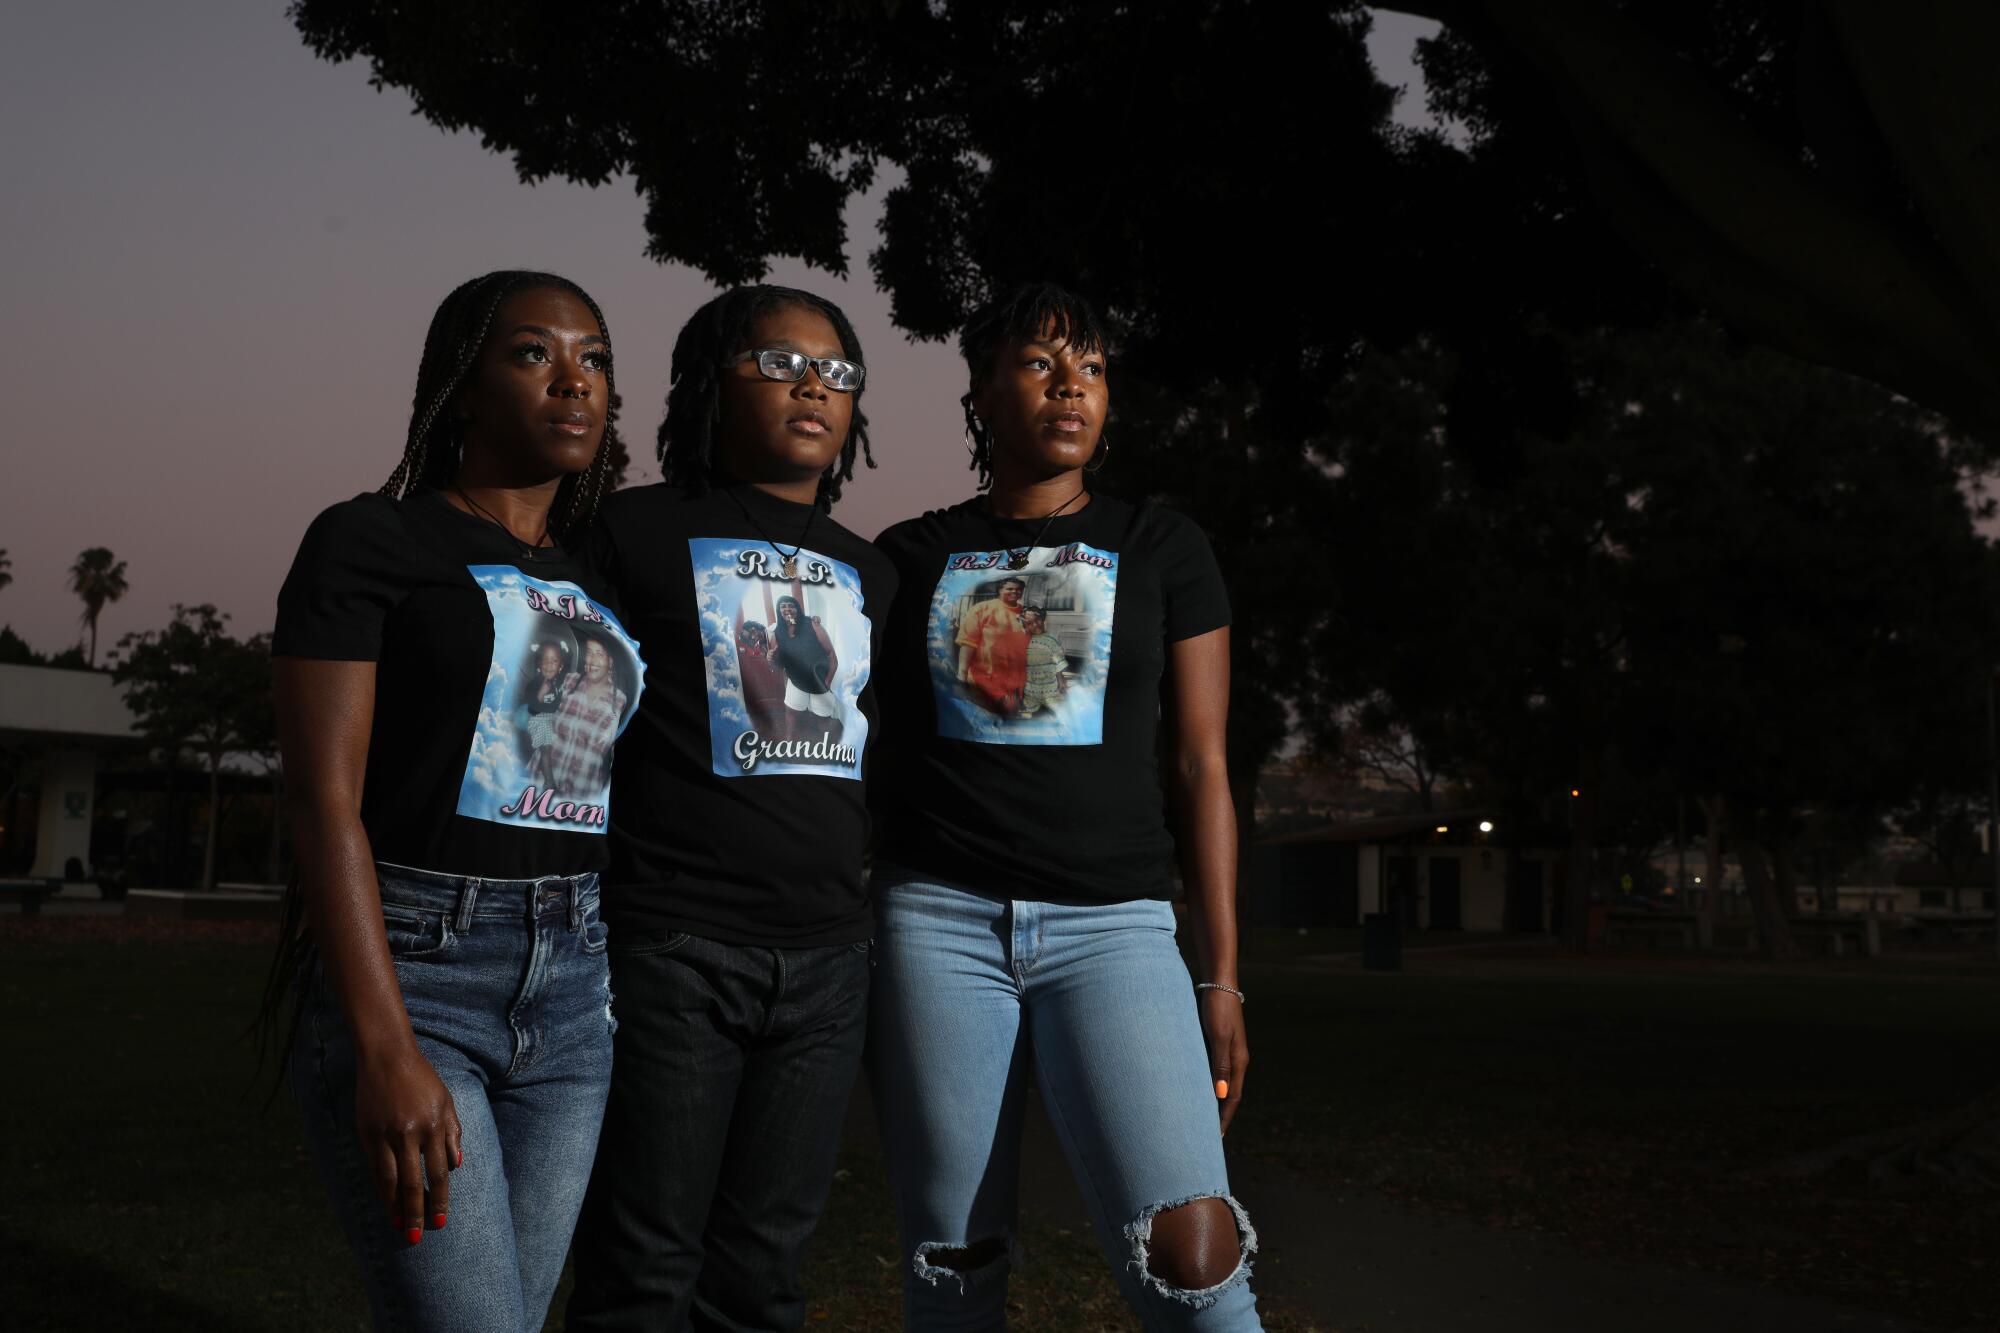 Two women and a boy stand for a portrait wearing T-shirts with images of a slain woman.